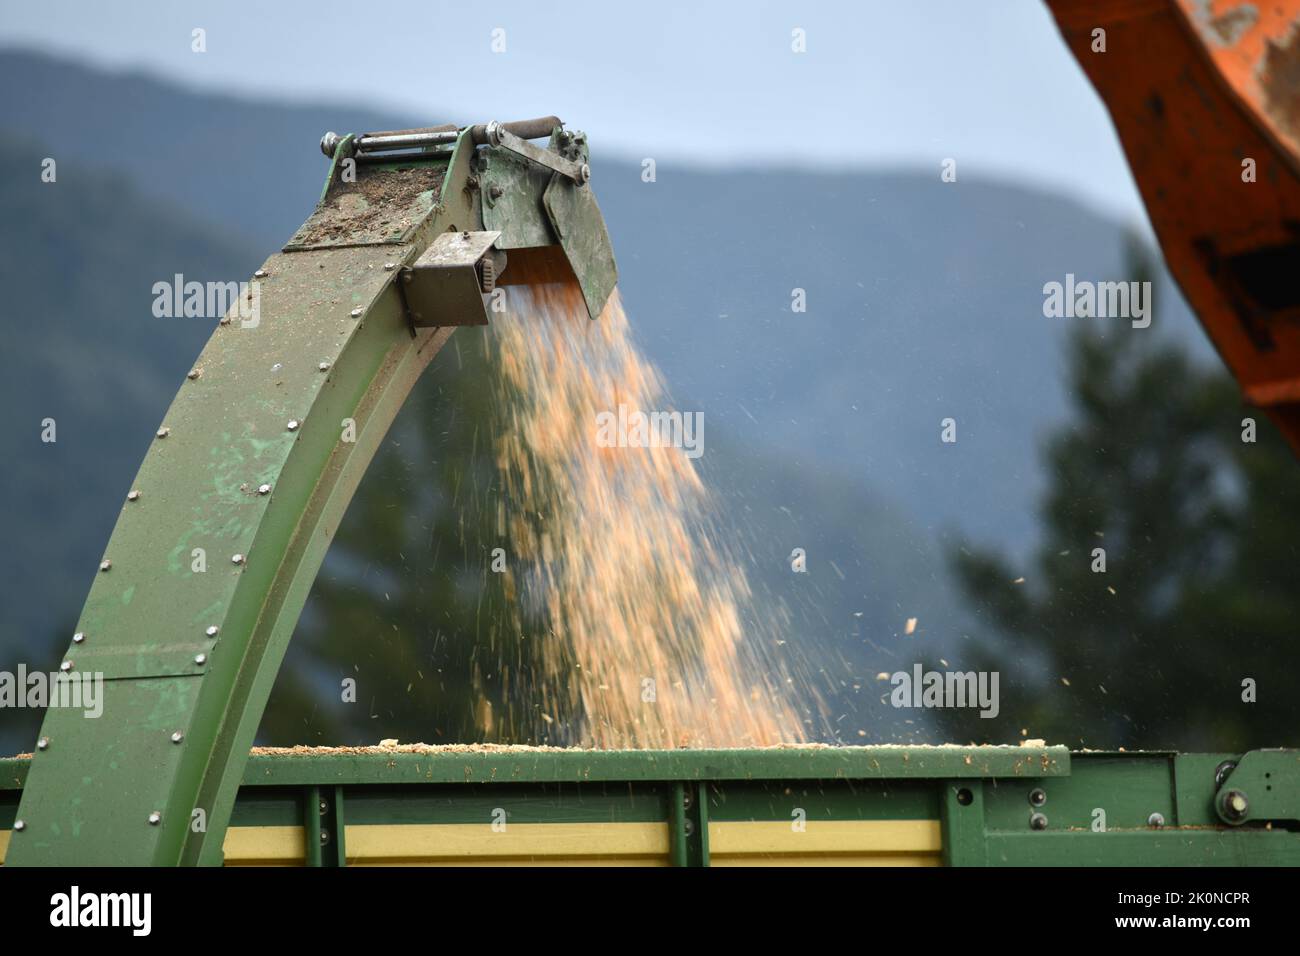 A chipping machine drops woodchip into a trailer Stock Photo